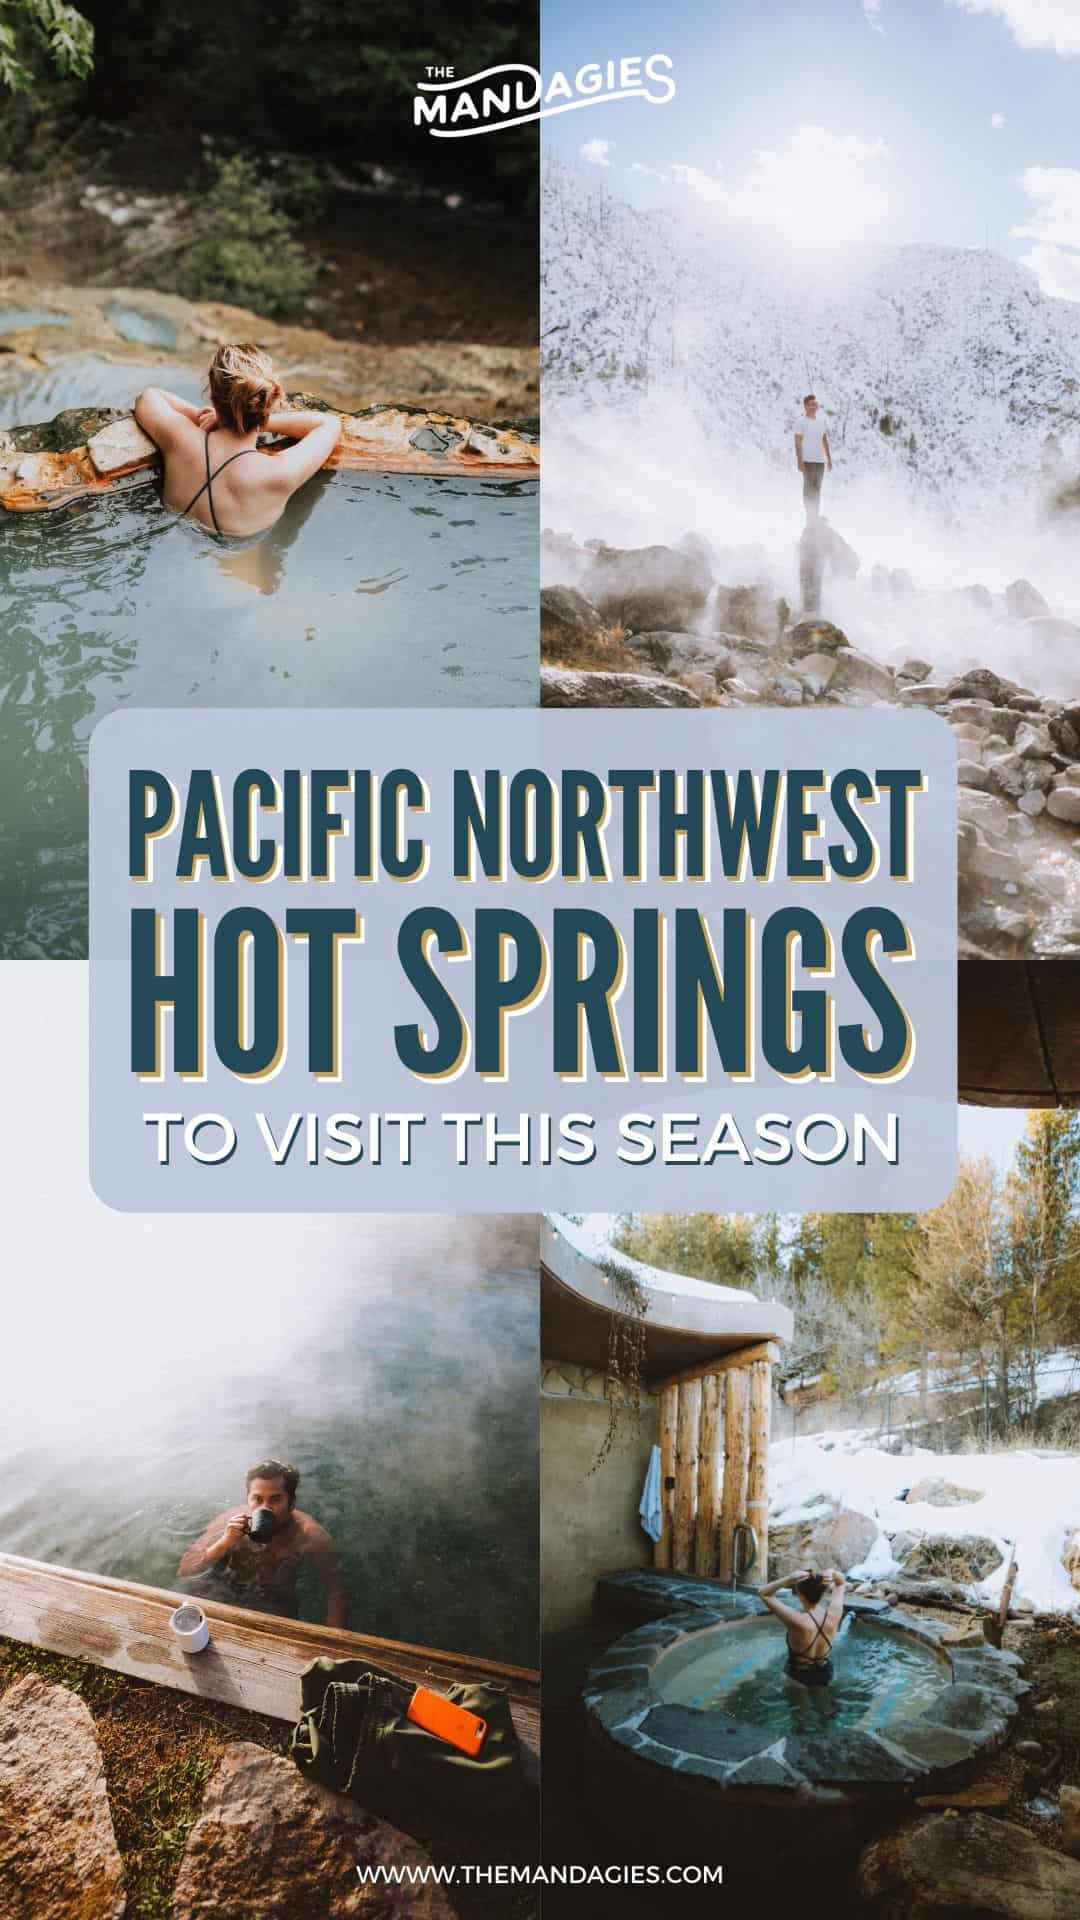 Get lost in some of the most enchanting hot springs in the Pacific Northwest! From Washington to Idaho, Oregon to British Columbia, we're sharing popular PNW hot springs from all over the region, and giving you tips on how to have the best experience! #washington #oregon #idaho #britishcolumbia #summer #hotsprings #photography #westcoast #PNW #pacificnorthwest #washingtonstate